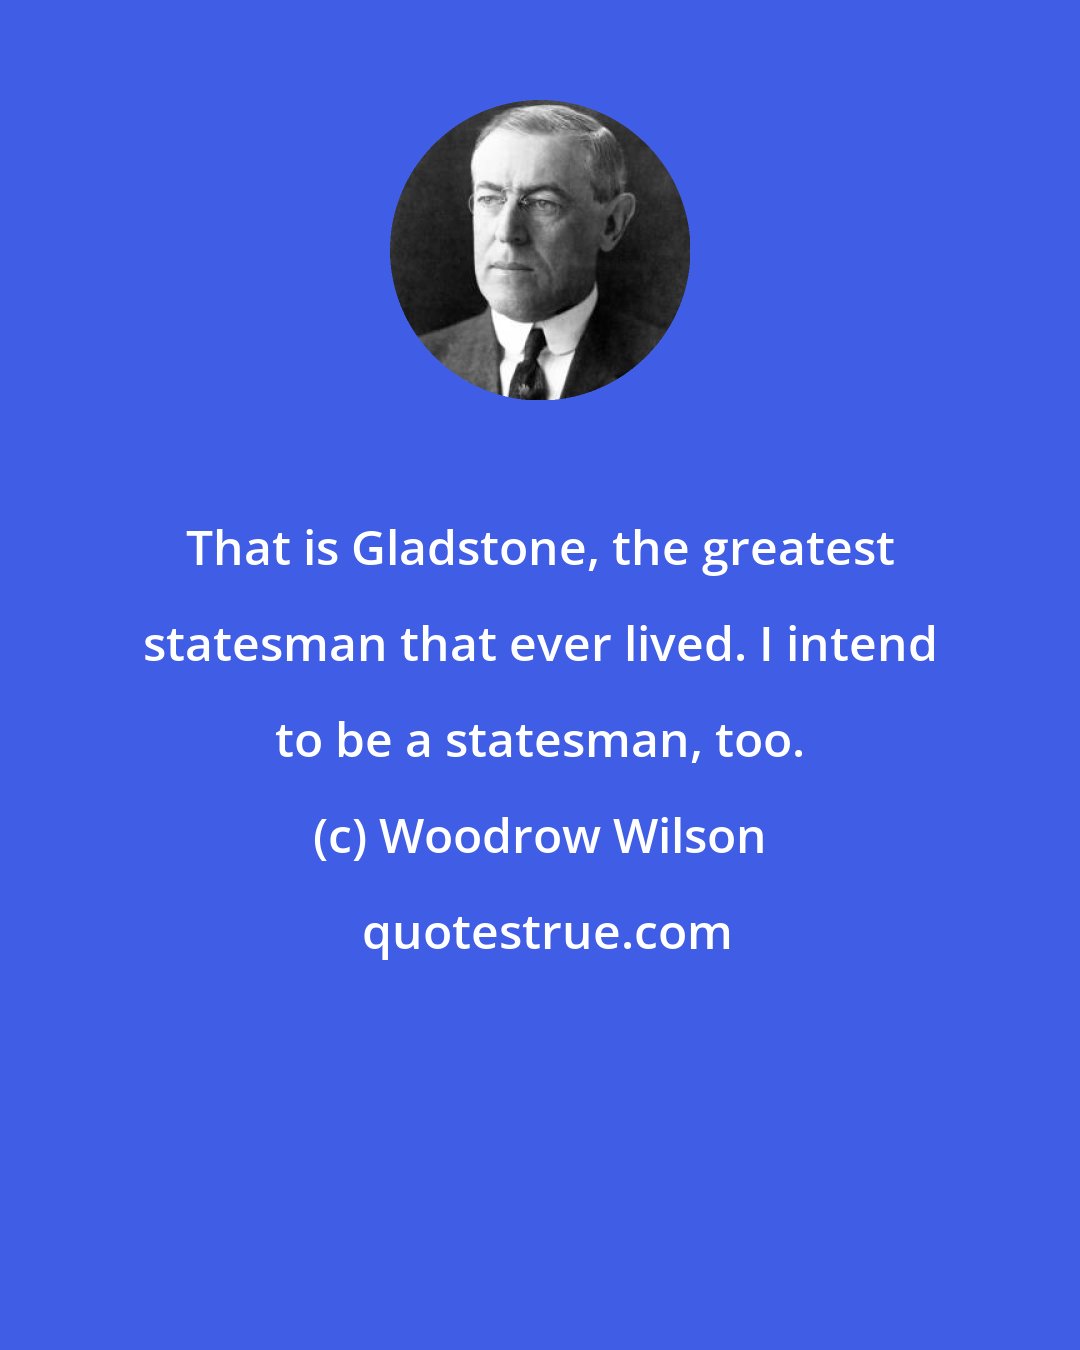 Woodrow Wilson: That is Gladstone, the greatest statesman that ever lived. I intend to be a statesman, too.